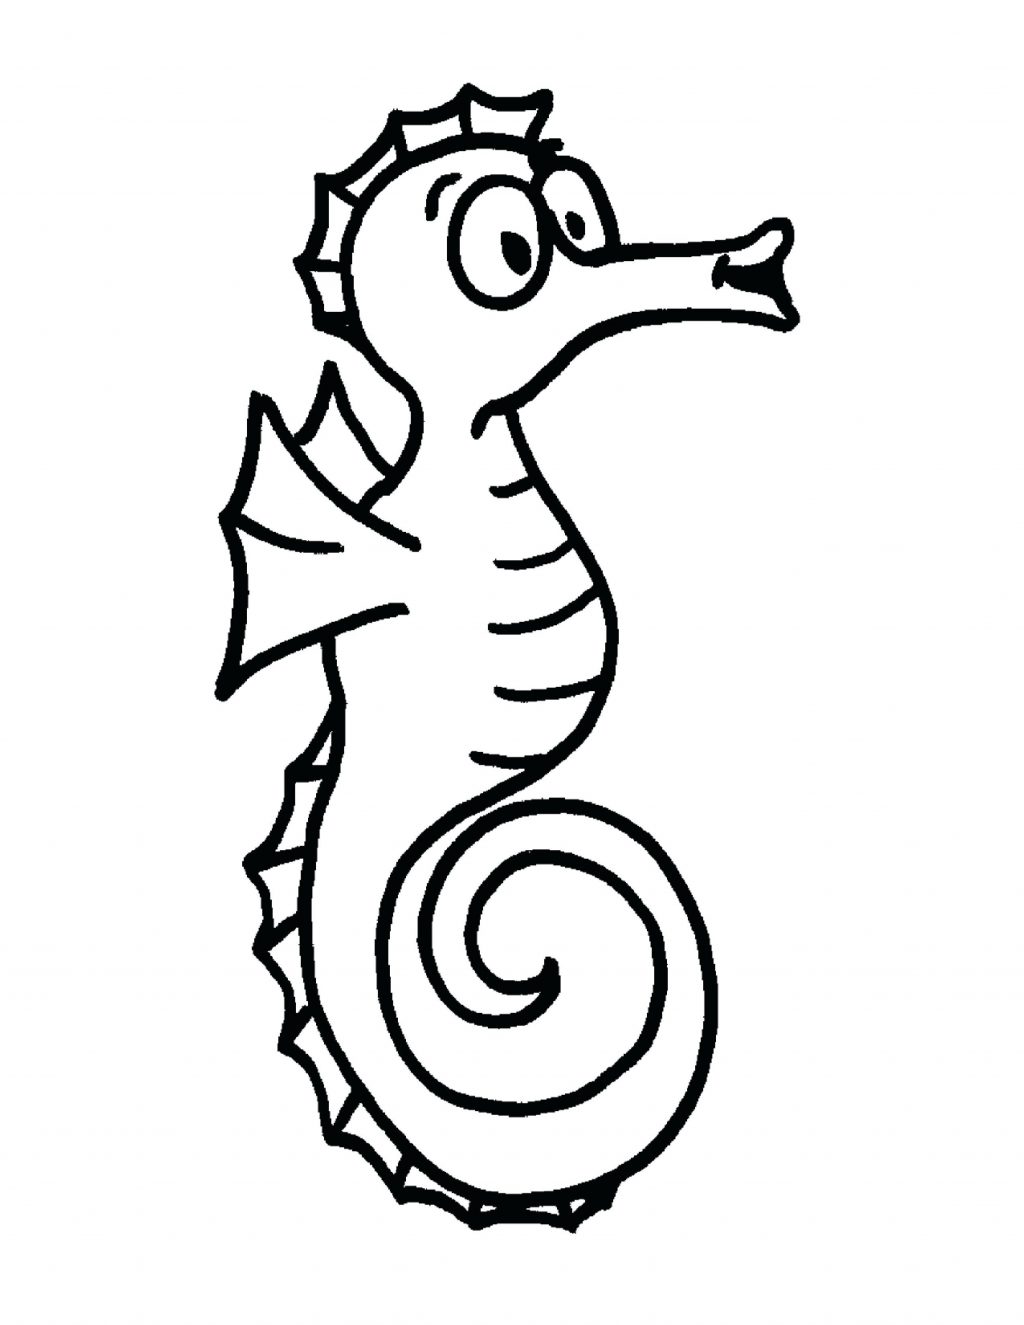 Seahorse Coloring Page at GetDrawings | Free download